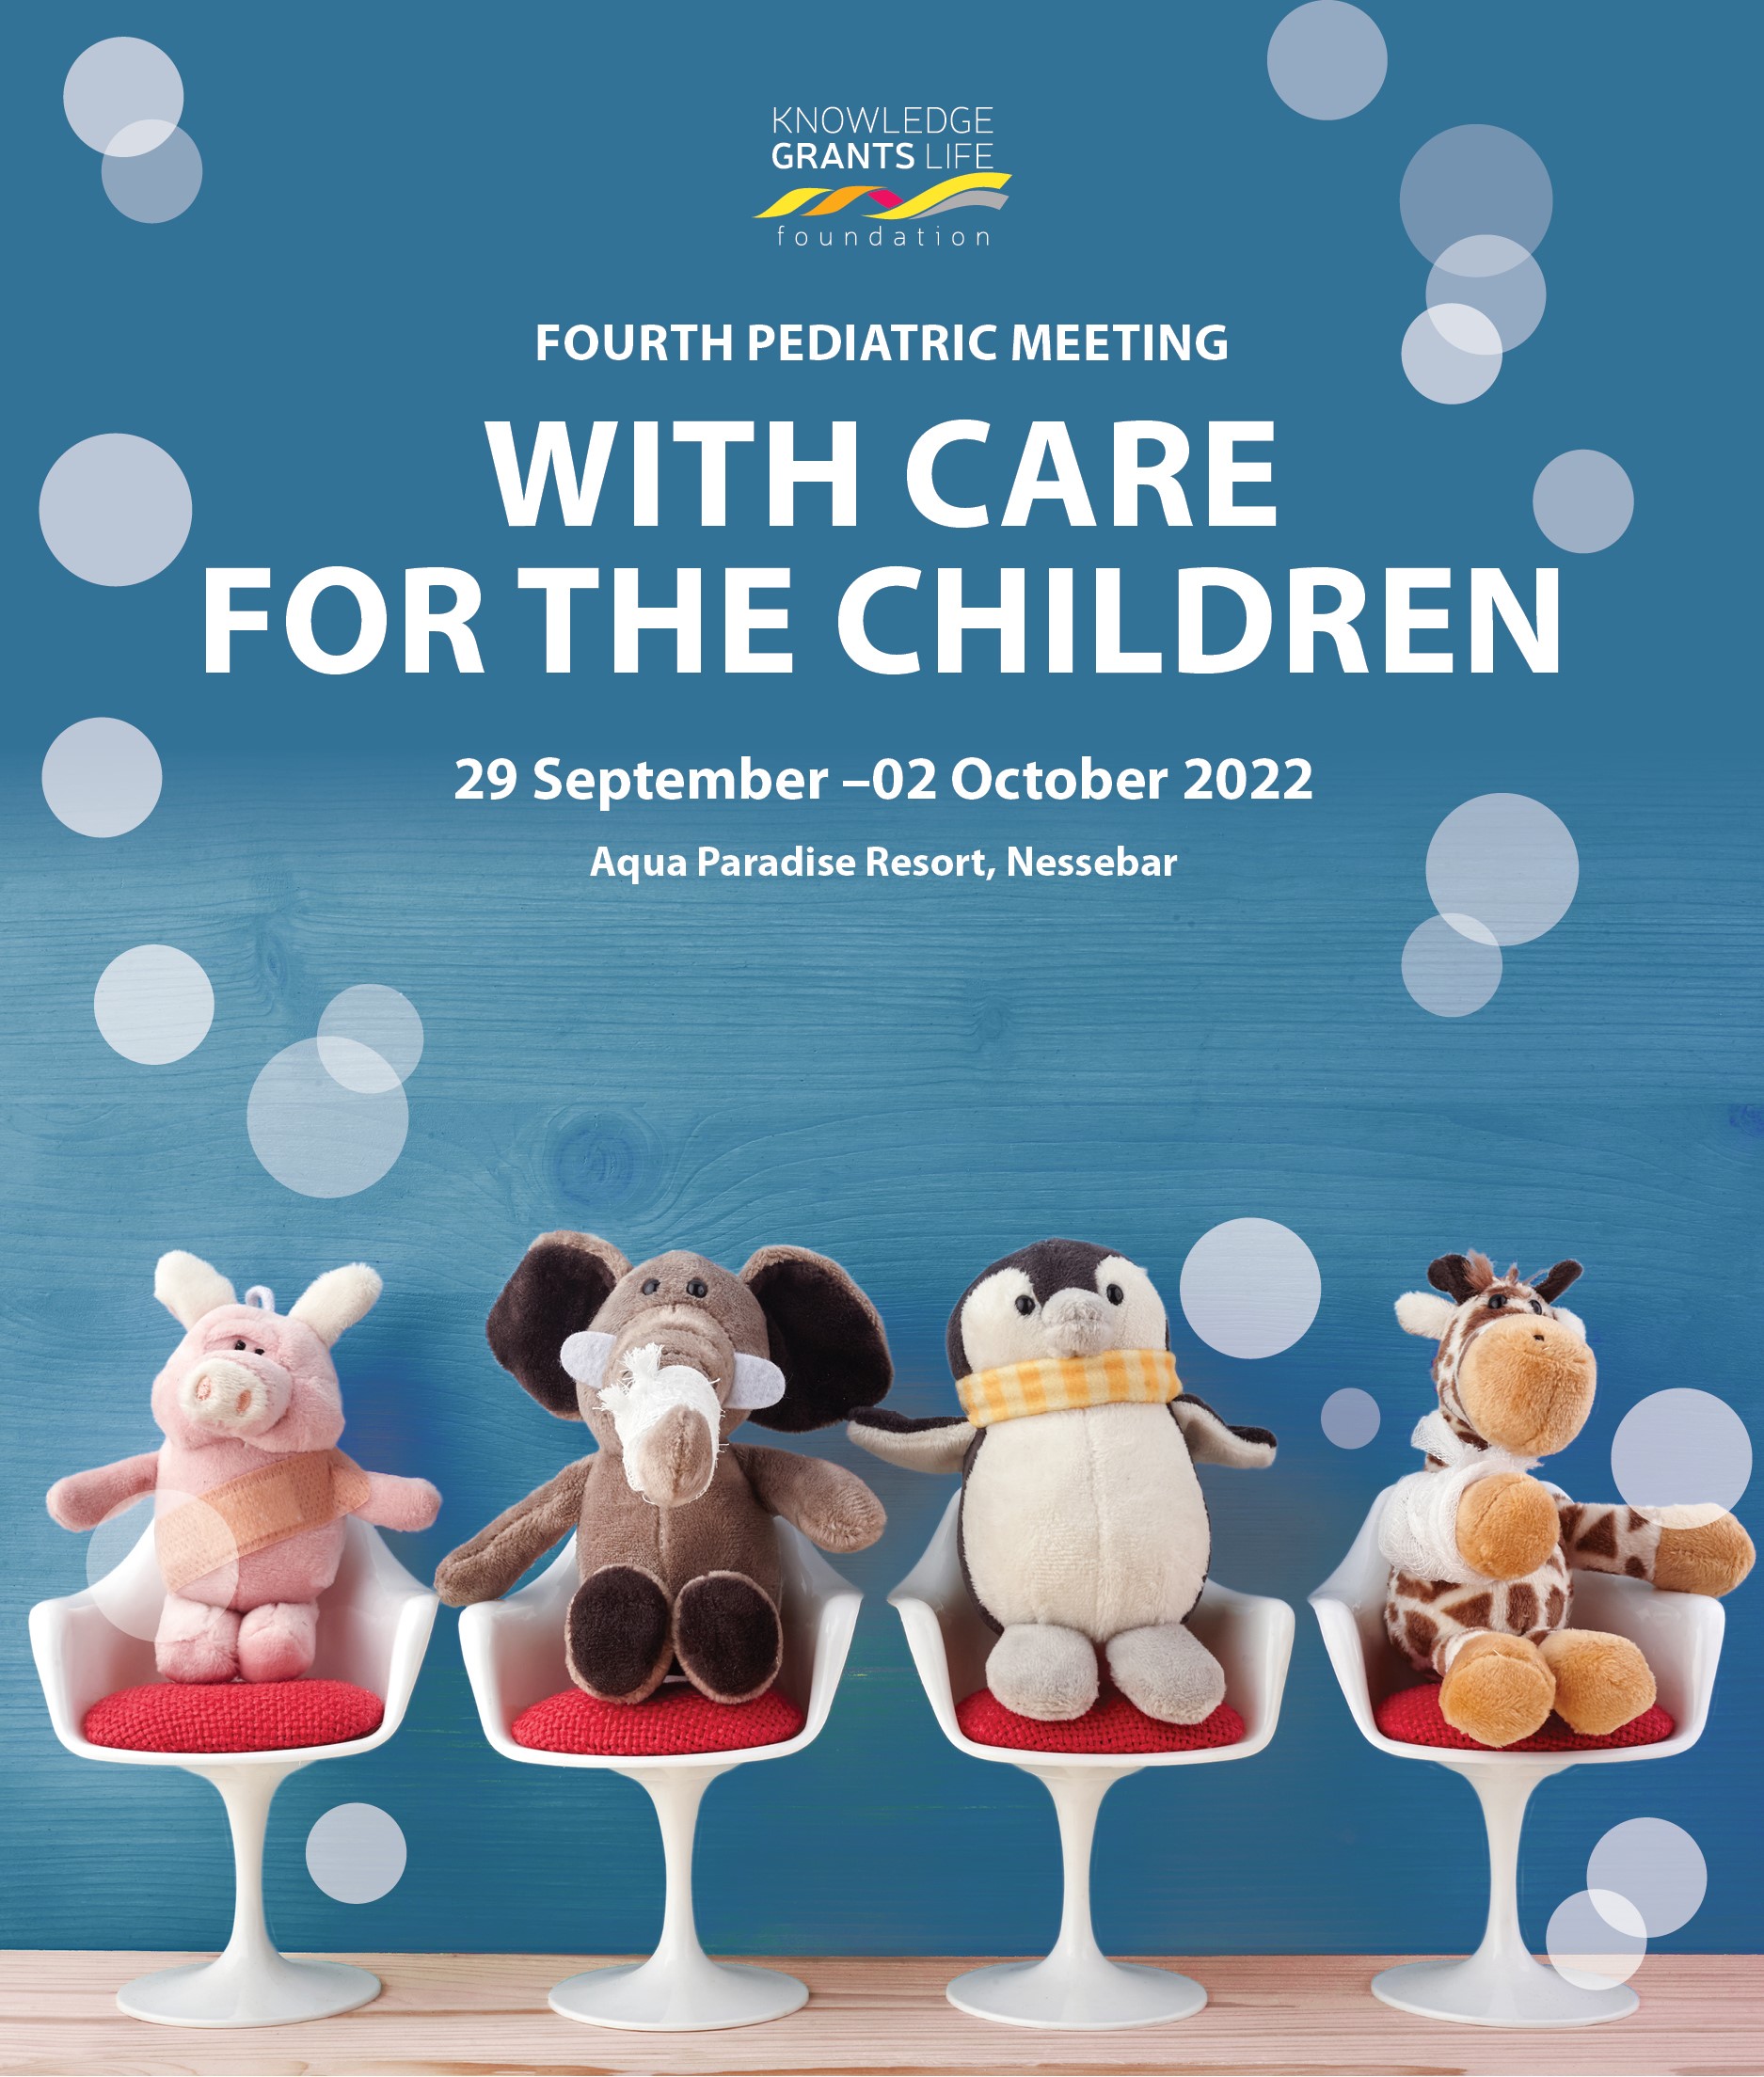 Forth pediatric meeting "With care for the children"